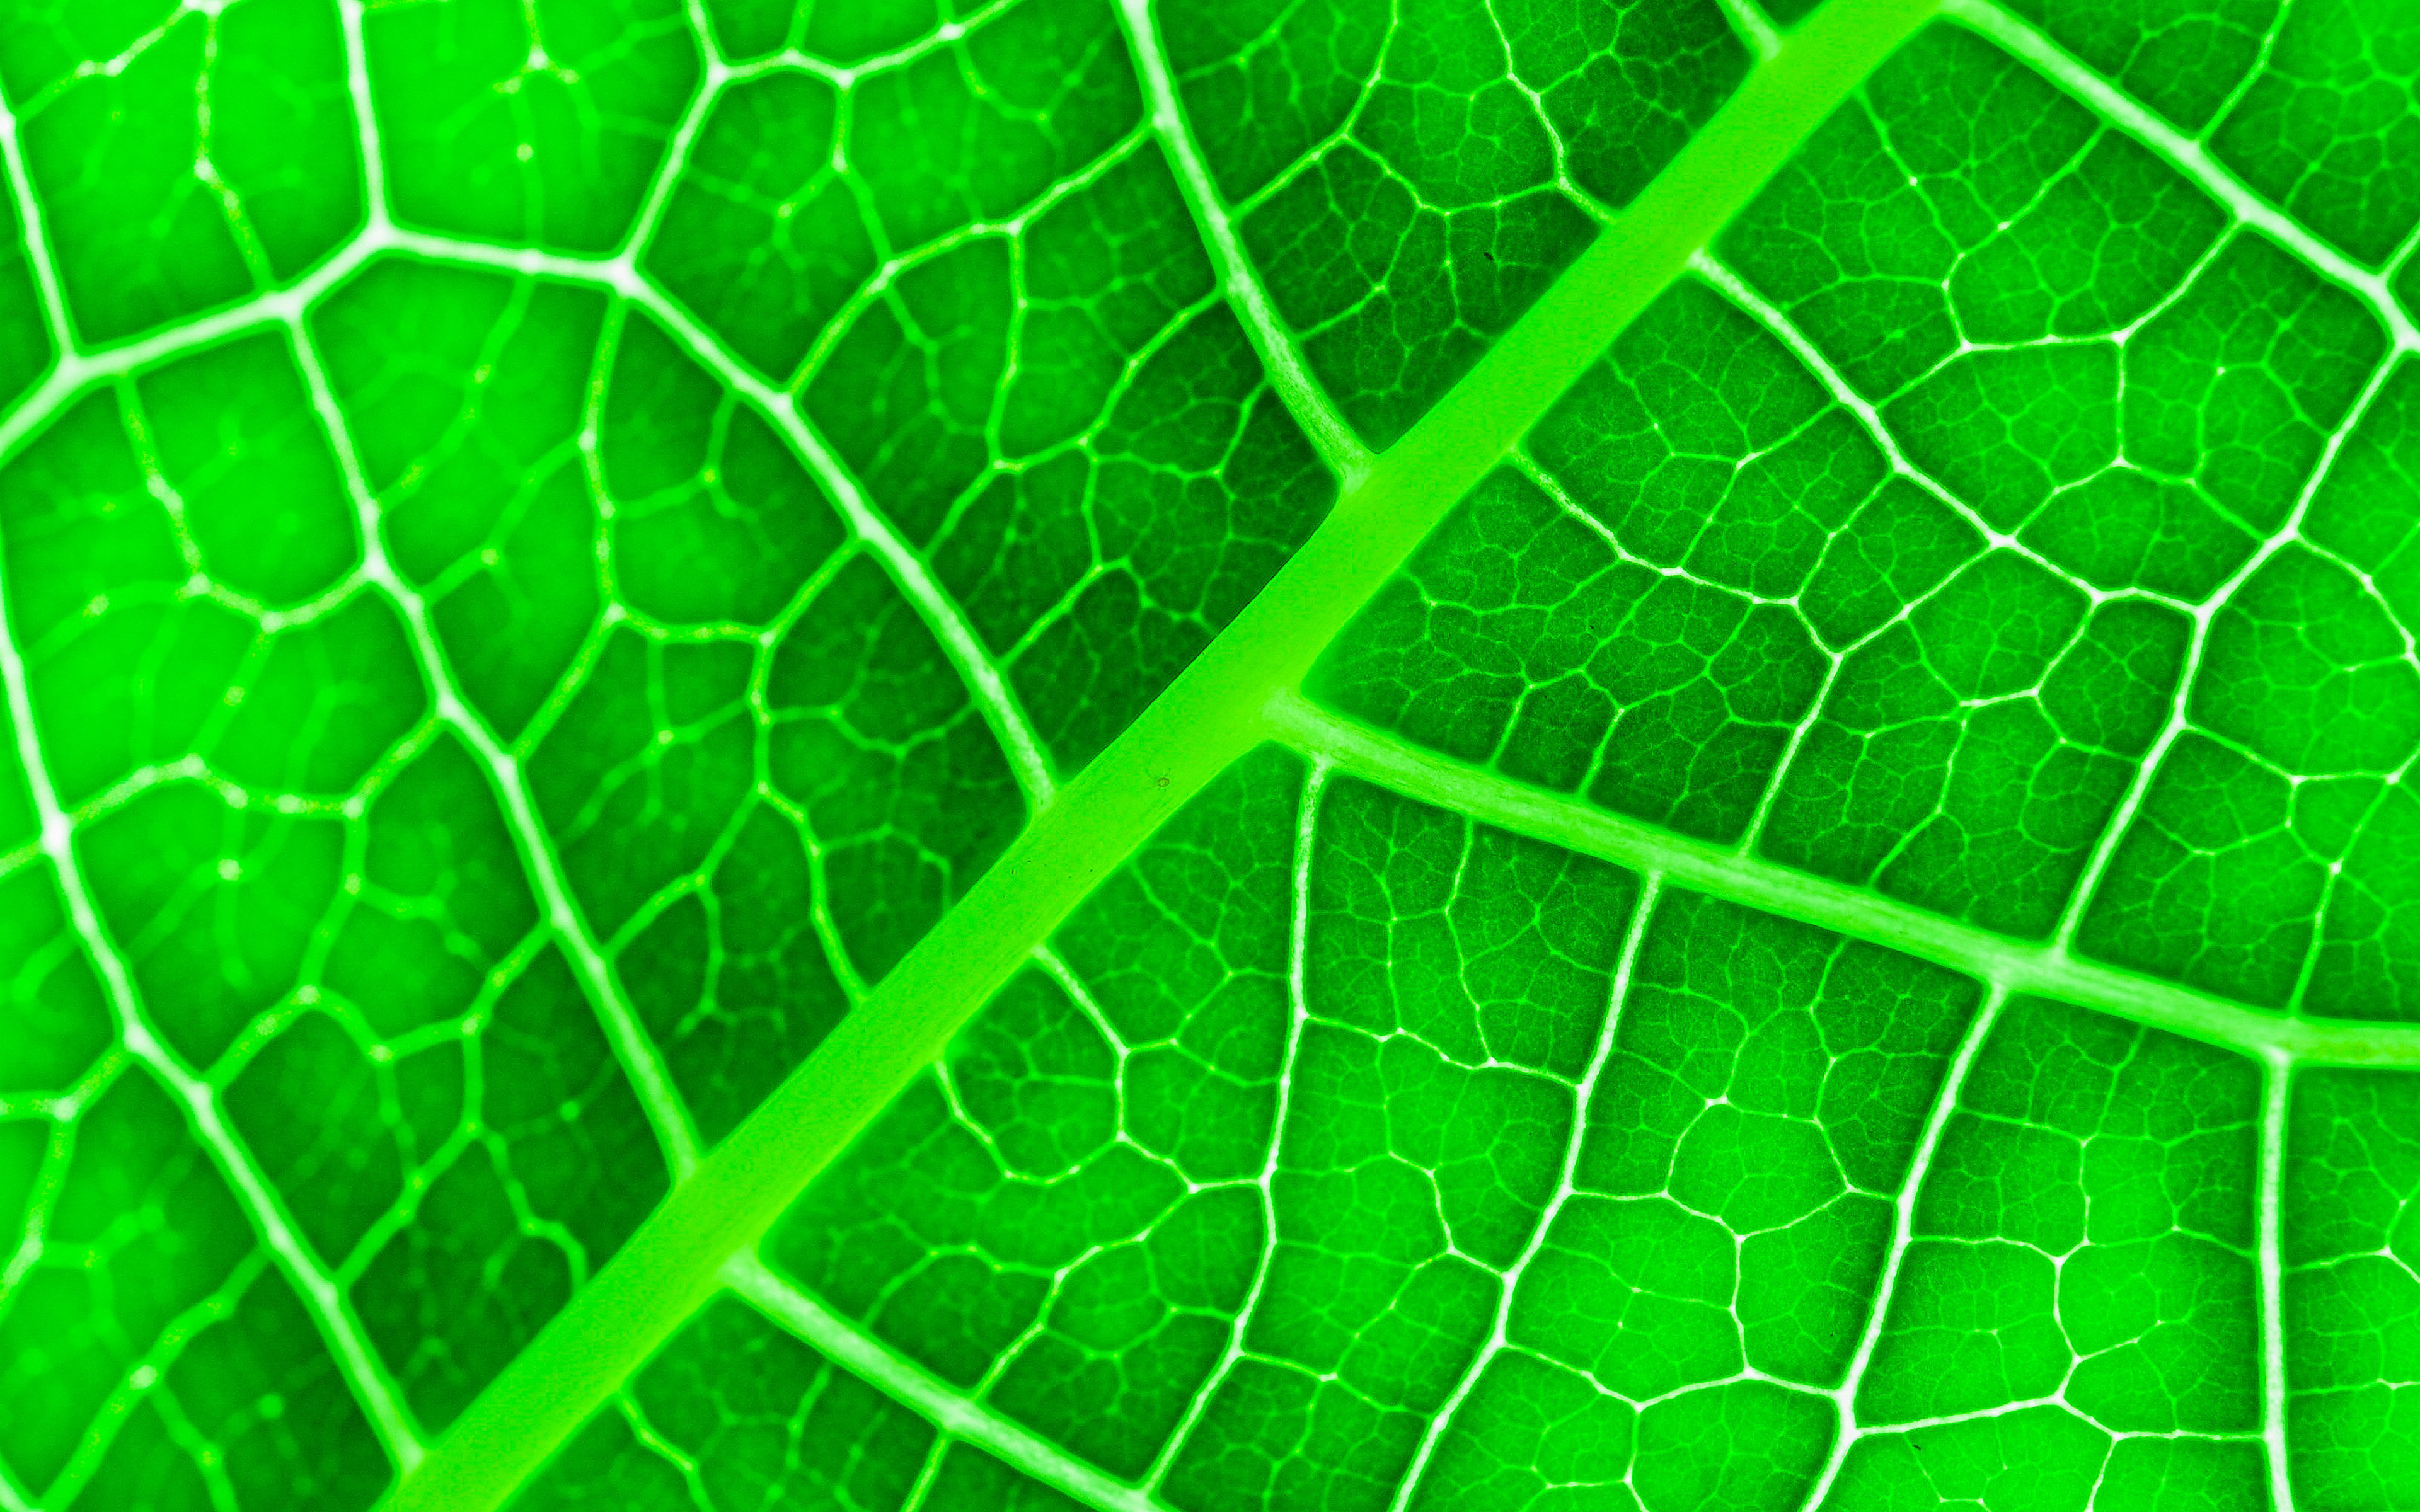 Download Wallpaper Green Leaves Texture, 4k, Close Up, Leaves, Leaves Texture, Green Leaves, Green Leaf, Macro, Leaf Pattern, Leaf Textures For Desktop With Resolution 3840x2400. High Quality HD Picture Wallpaper